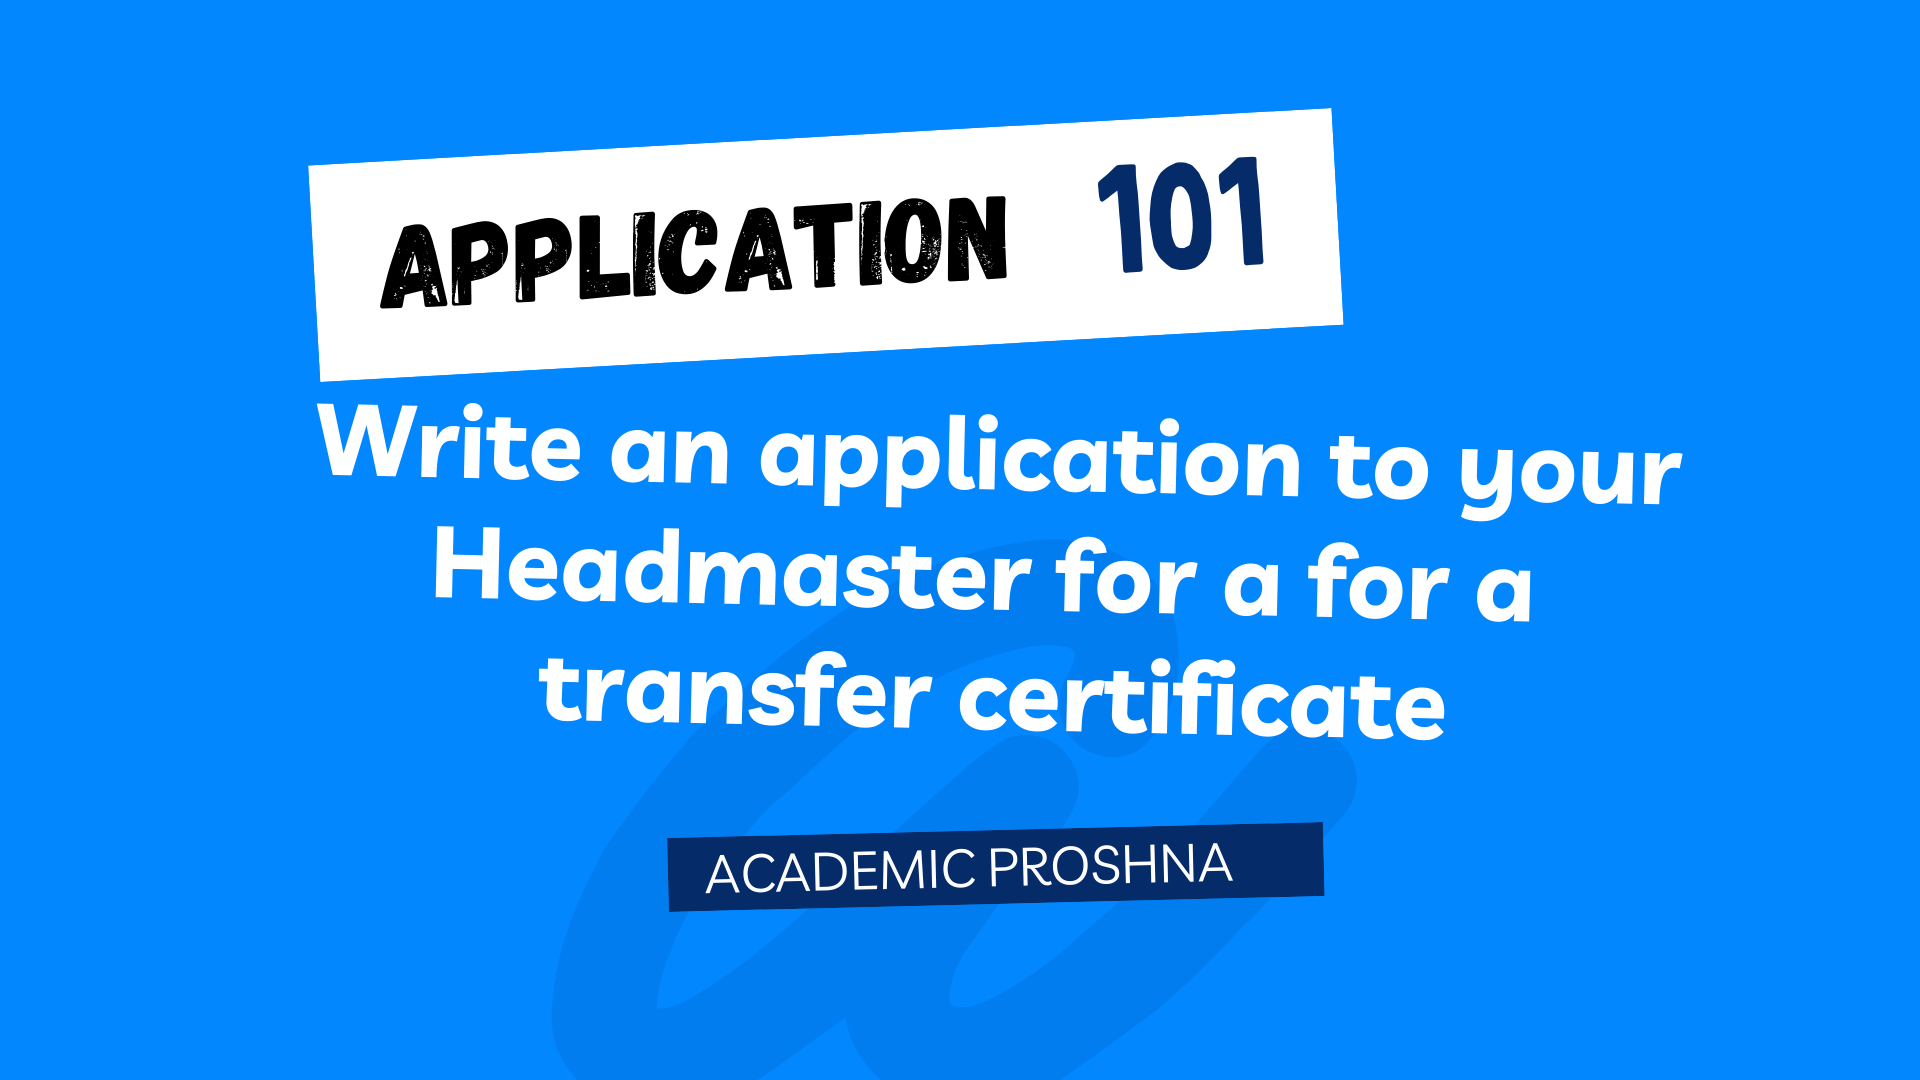 Write an application to your Headmaster for a transfer certificate